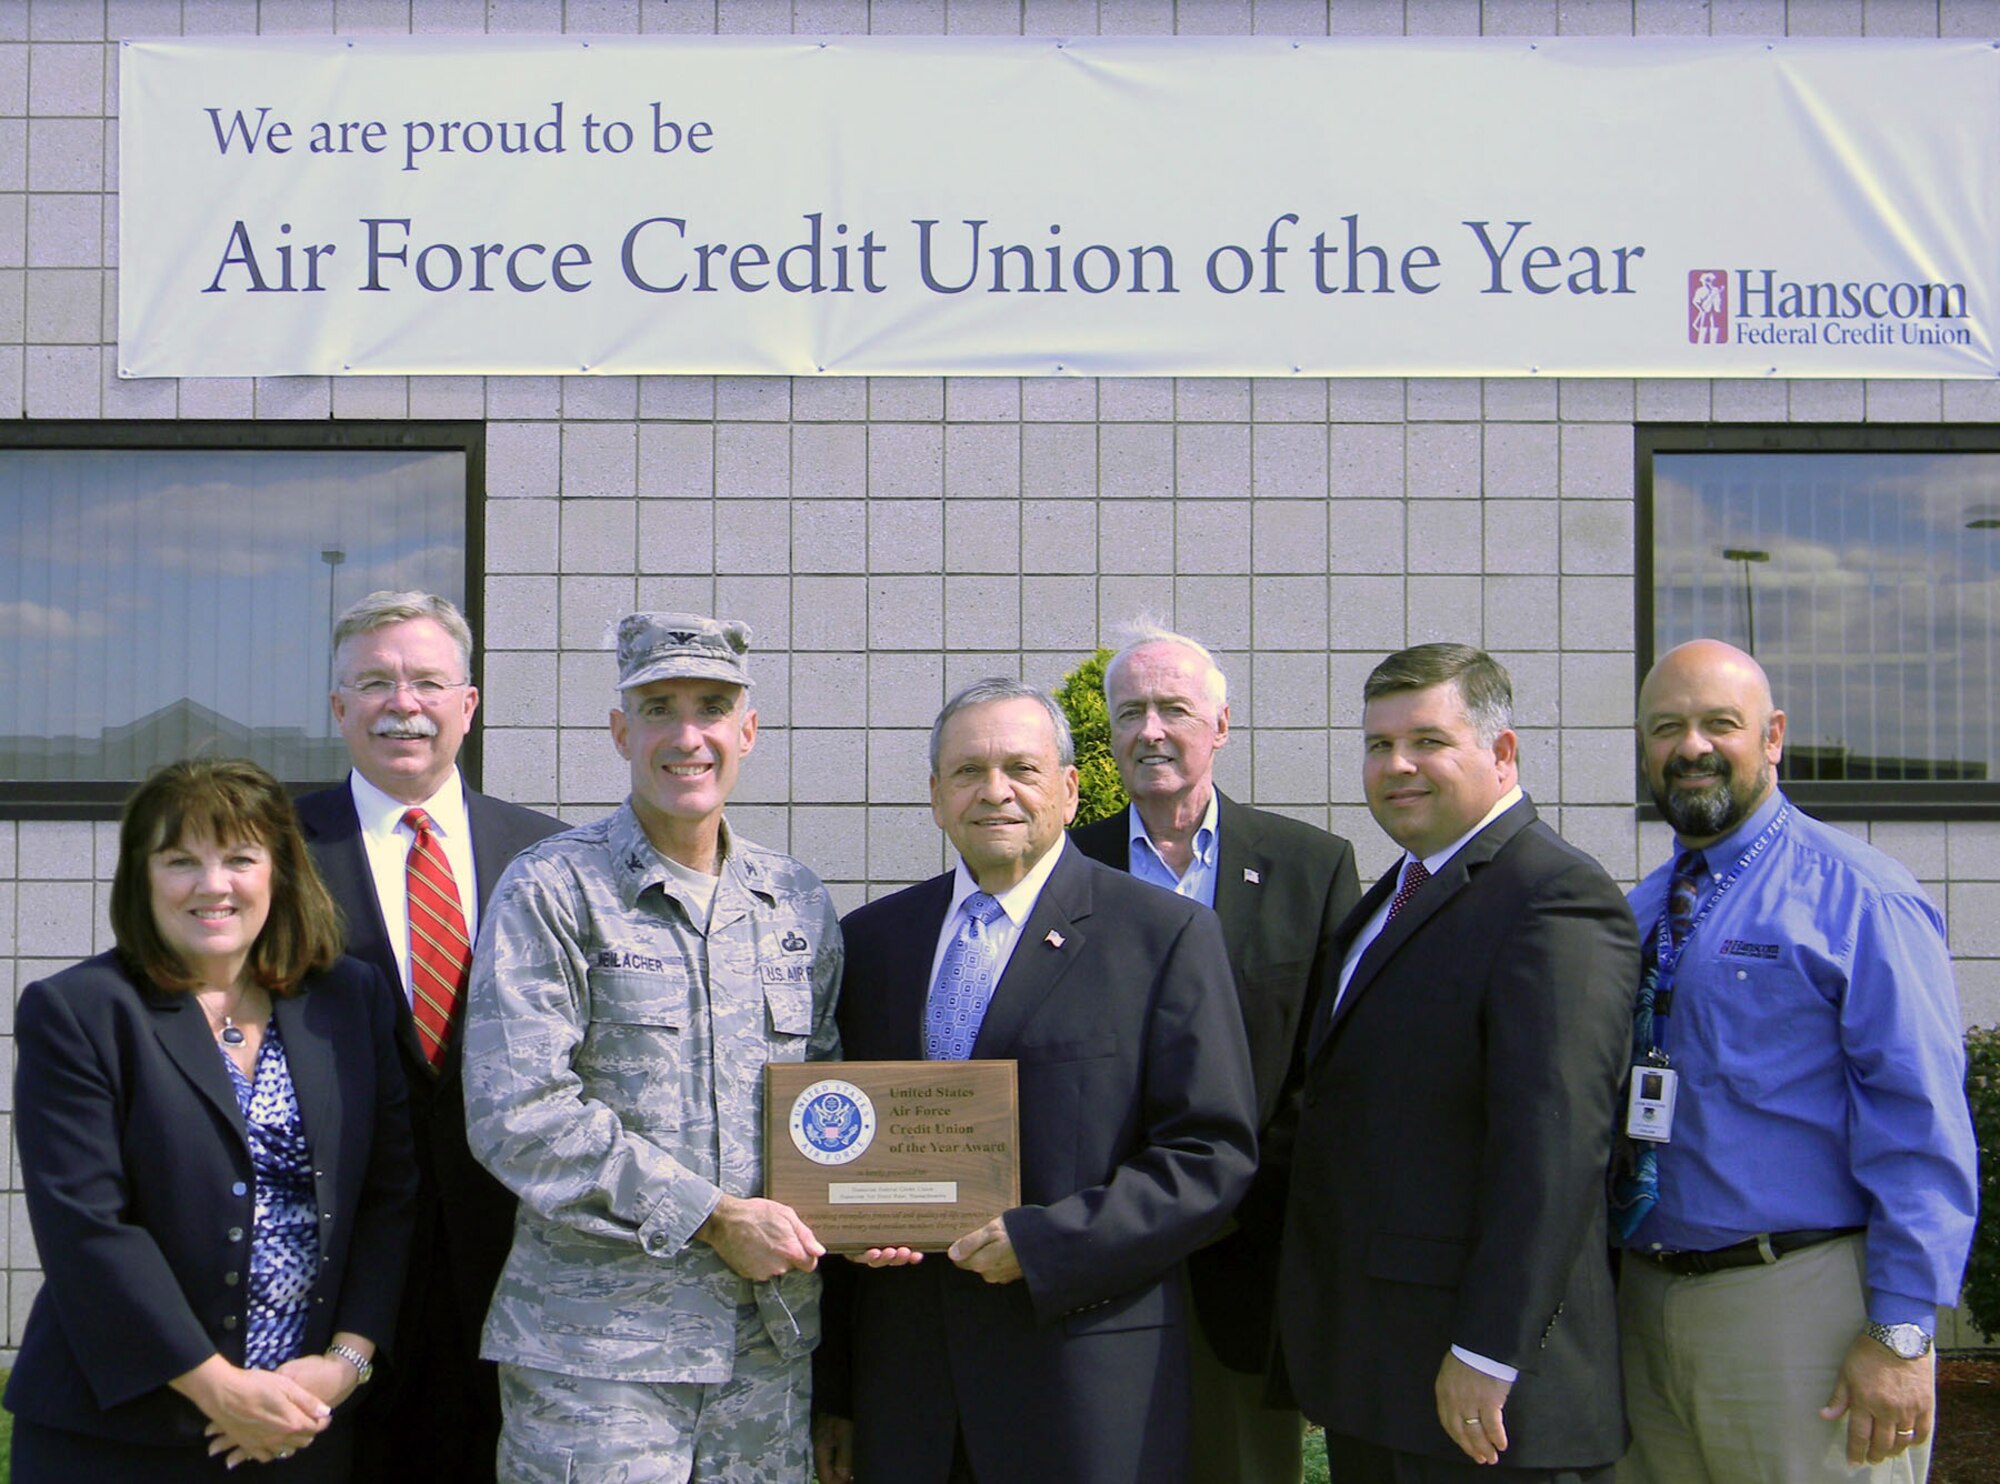 HANSCOM AIR FORCE BASE, Mass. - Col. Lester A Weilacher, 66th Air Base Group commander, presents a plaque recognizing Hanscom Federal Credit Union as Air Force Credit Union of the Year for 2011 to Paul Marotta (center), HFCU chairman of the board, outside of the credit union Sept. 27. Also pictured from left to right are HFCU board member Theresa Conrad, President and CEO David Sprague, board member Frederick Ryan, 66th Air Base Group deputy director Tom Fredericks and board member John Delcore. (Courtesy photo)